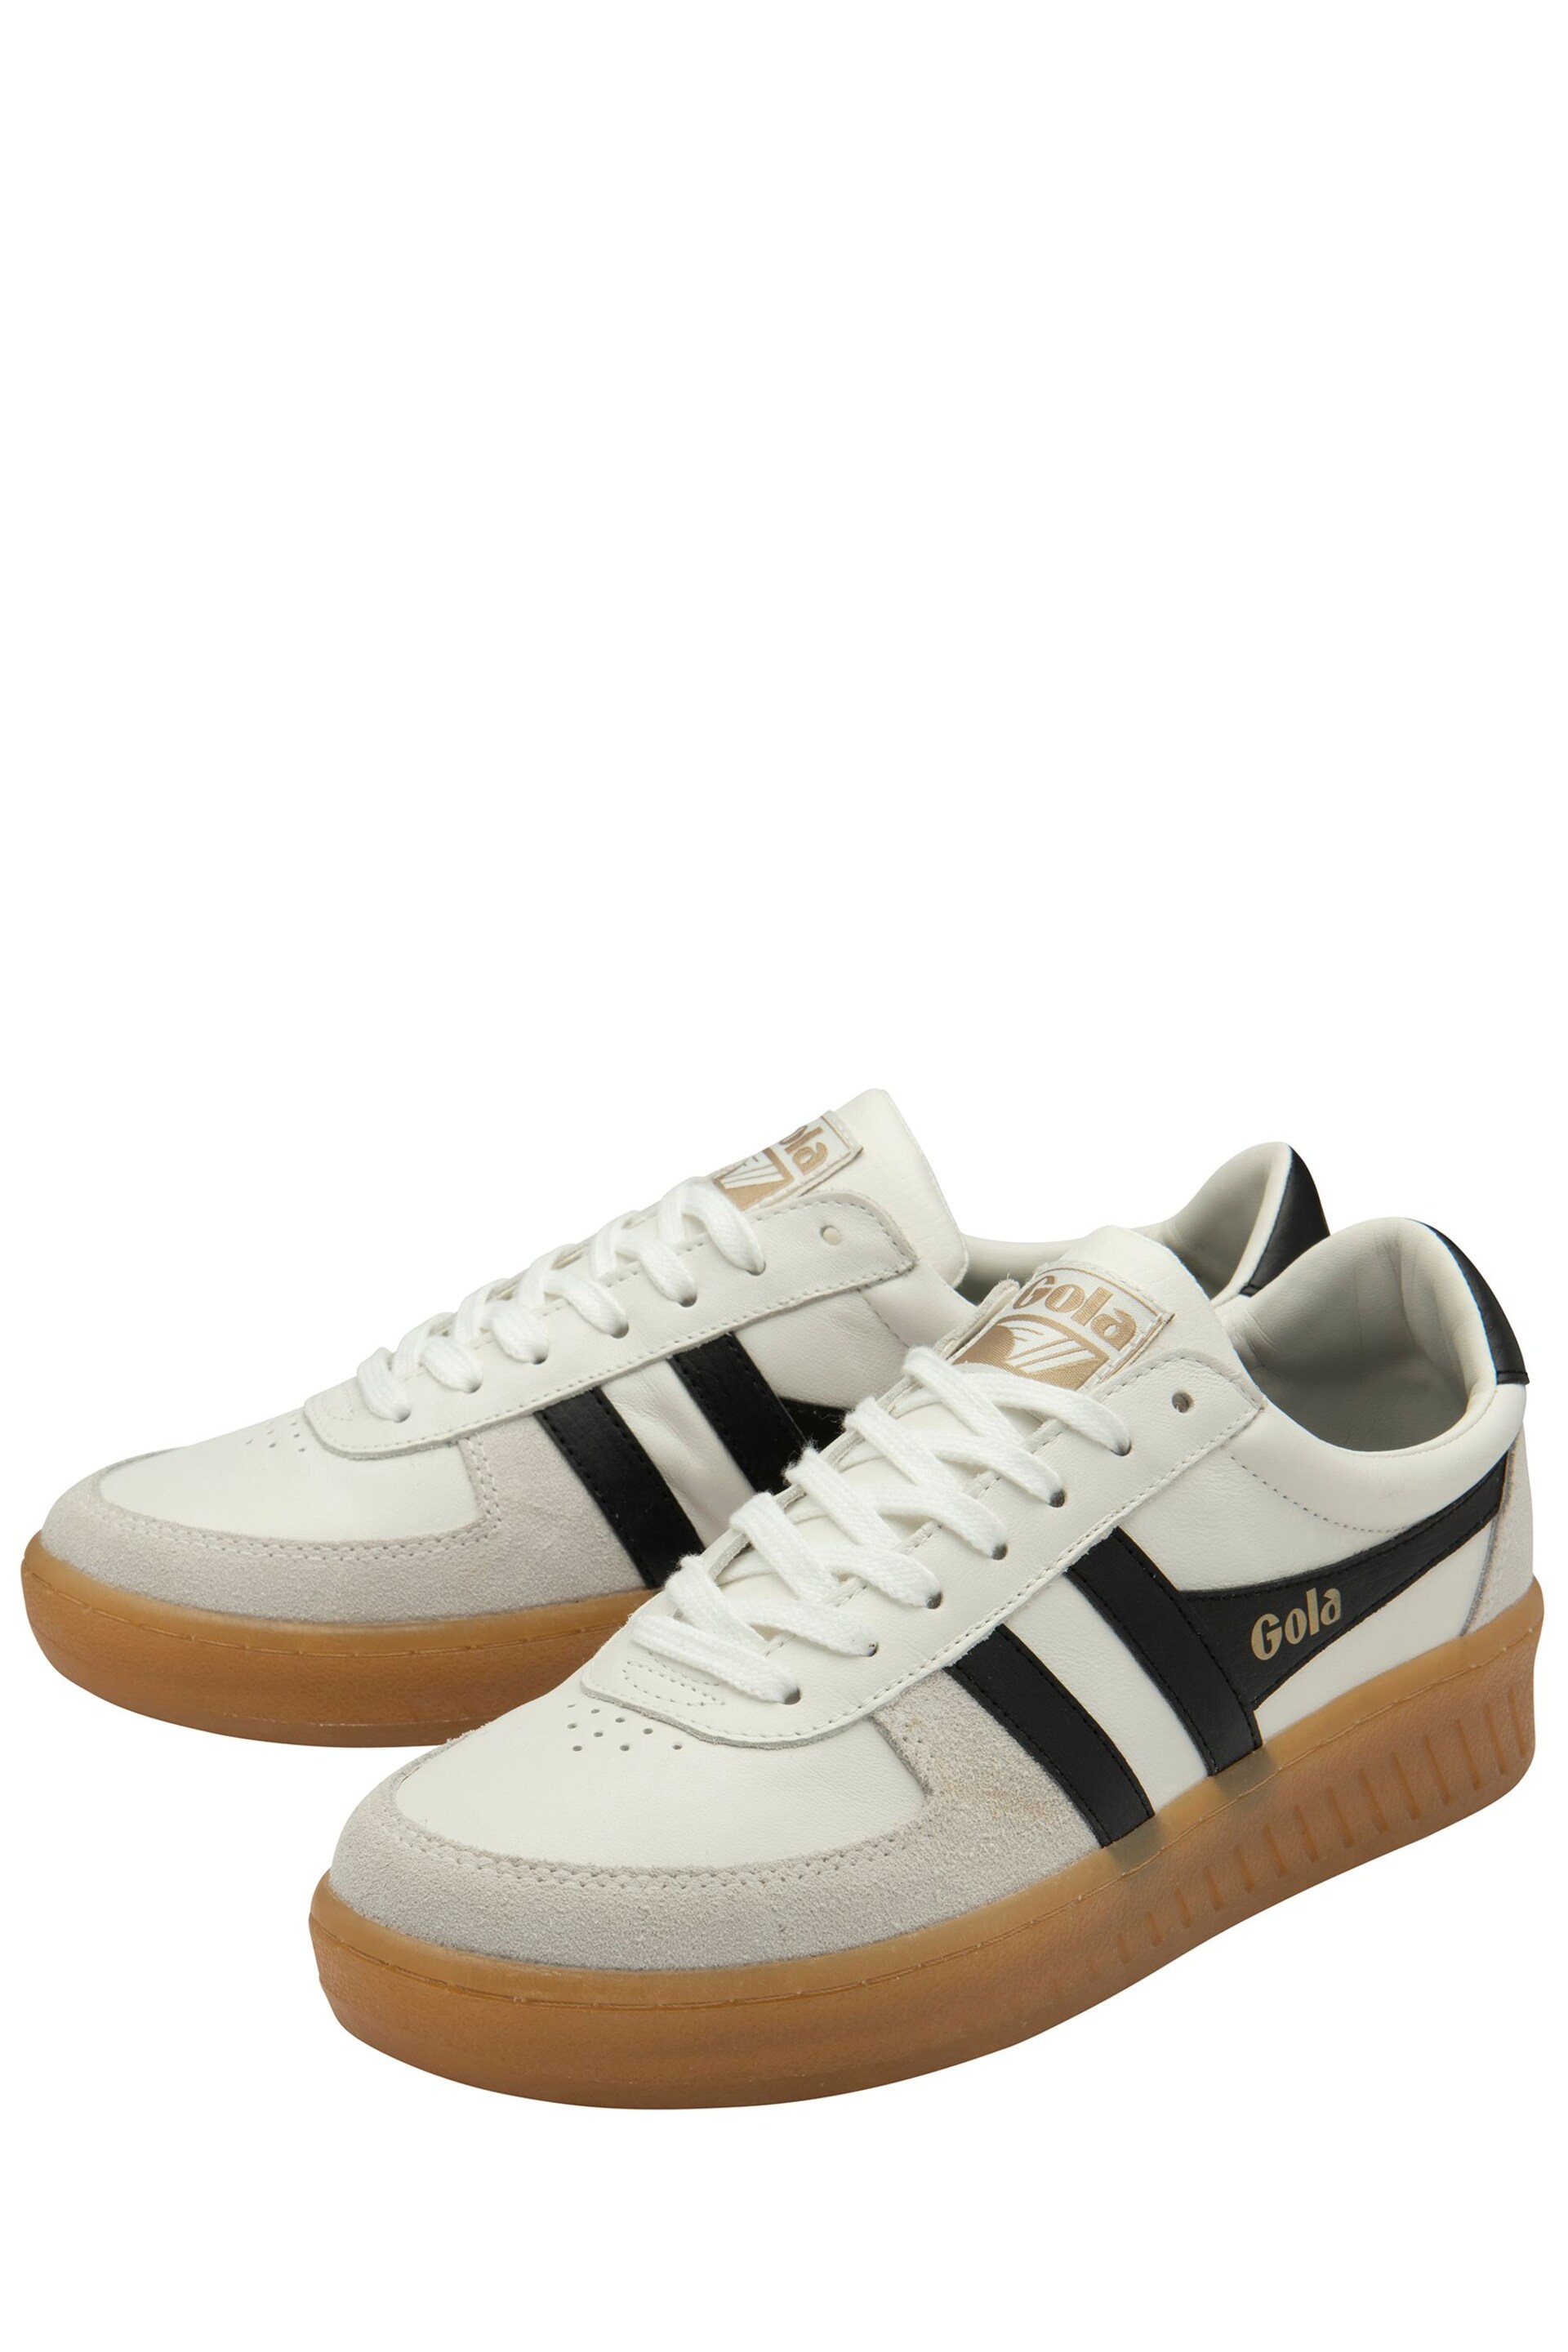 Gola White Mens Grandslam Elite Leather Lace-Up Trainers - Image 2 of 4